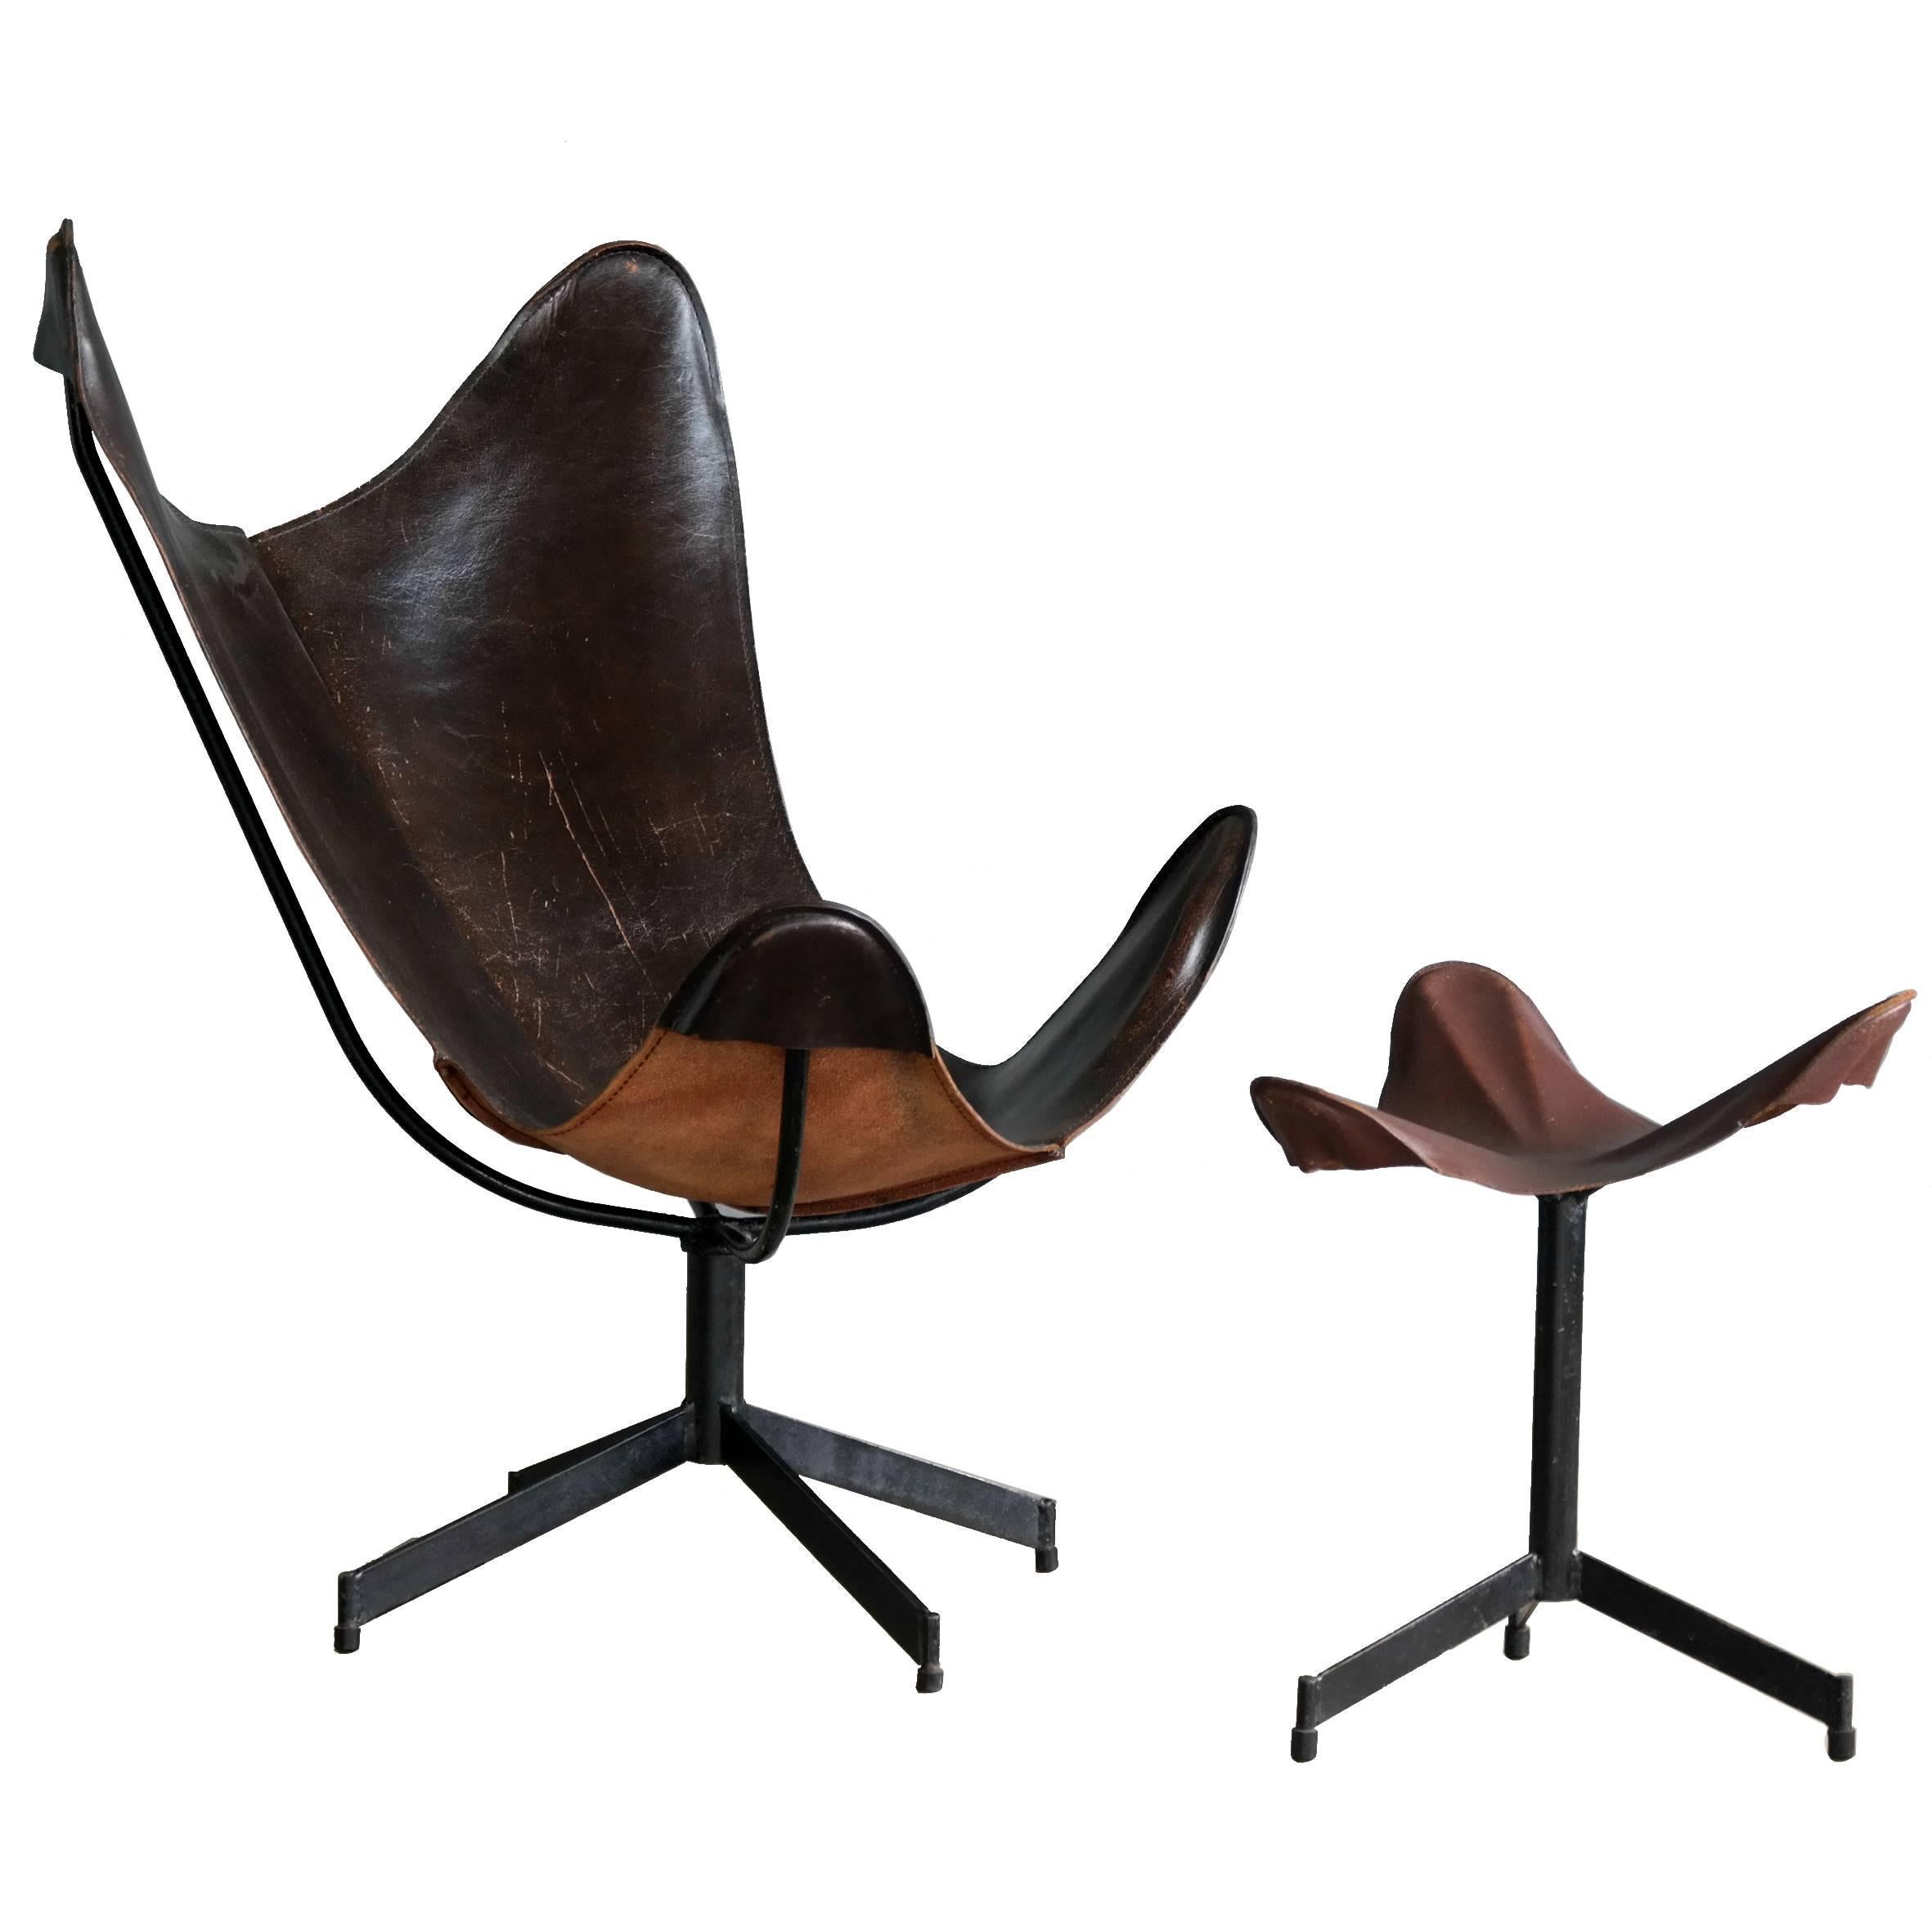 1960s Butterfly Sling Chair and Ottoman in Saddle Leather by William Katavolos